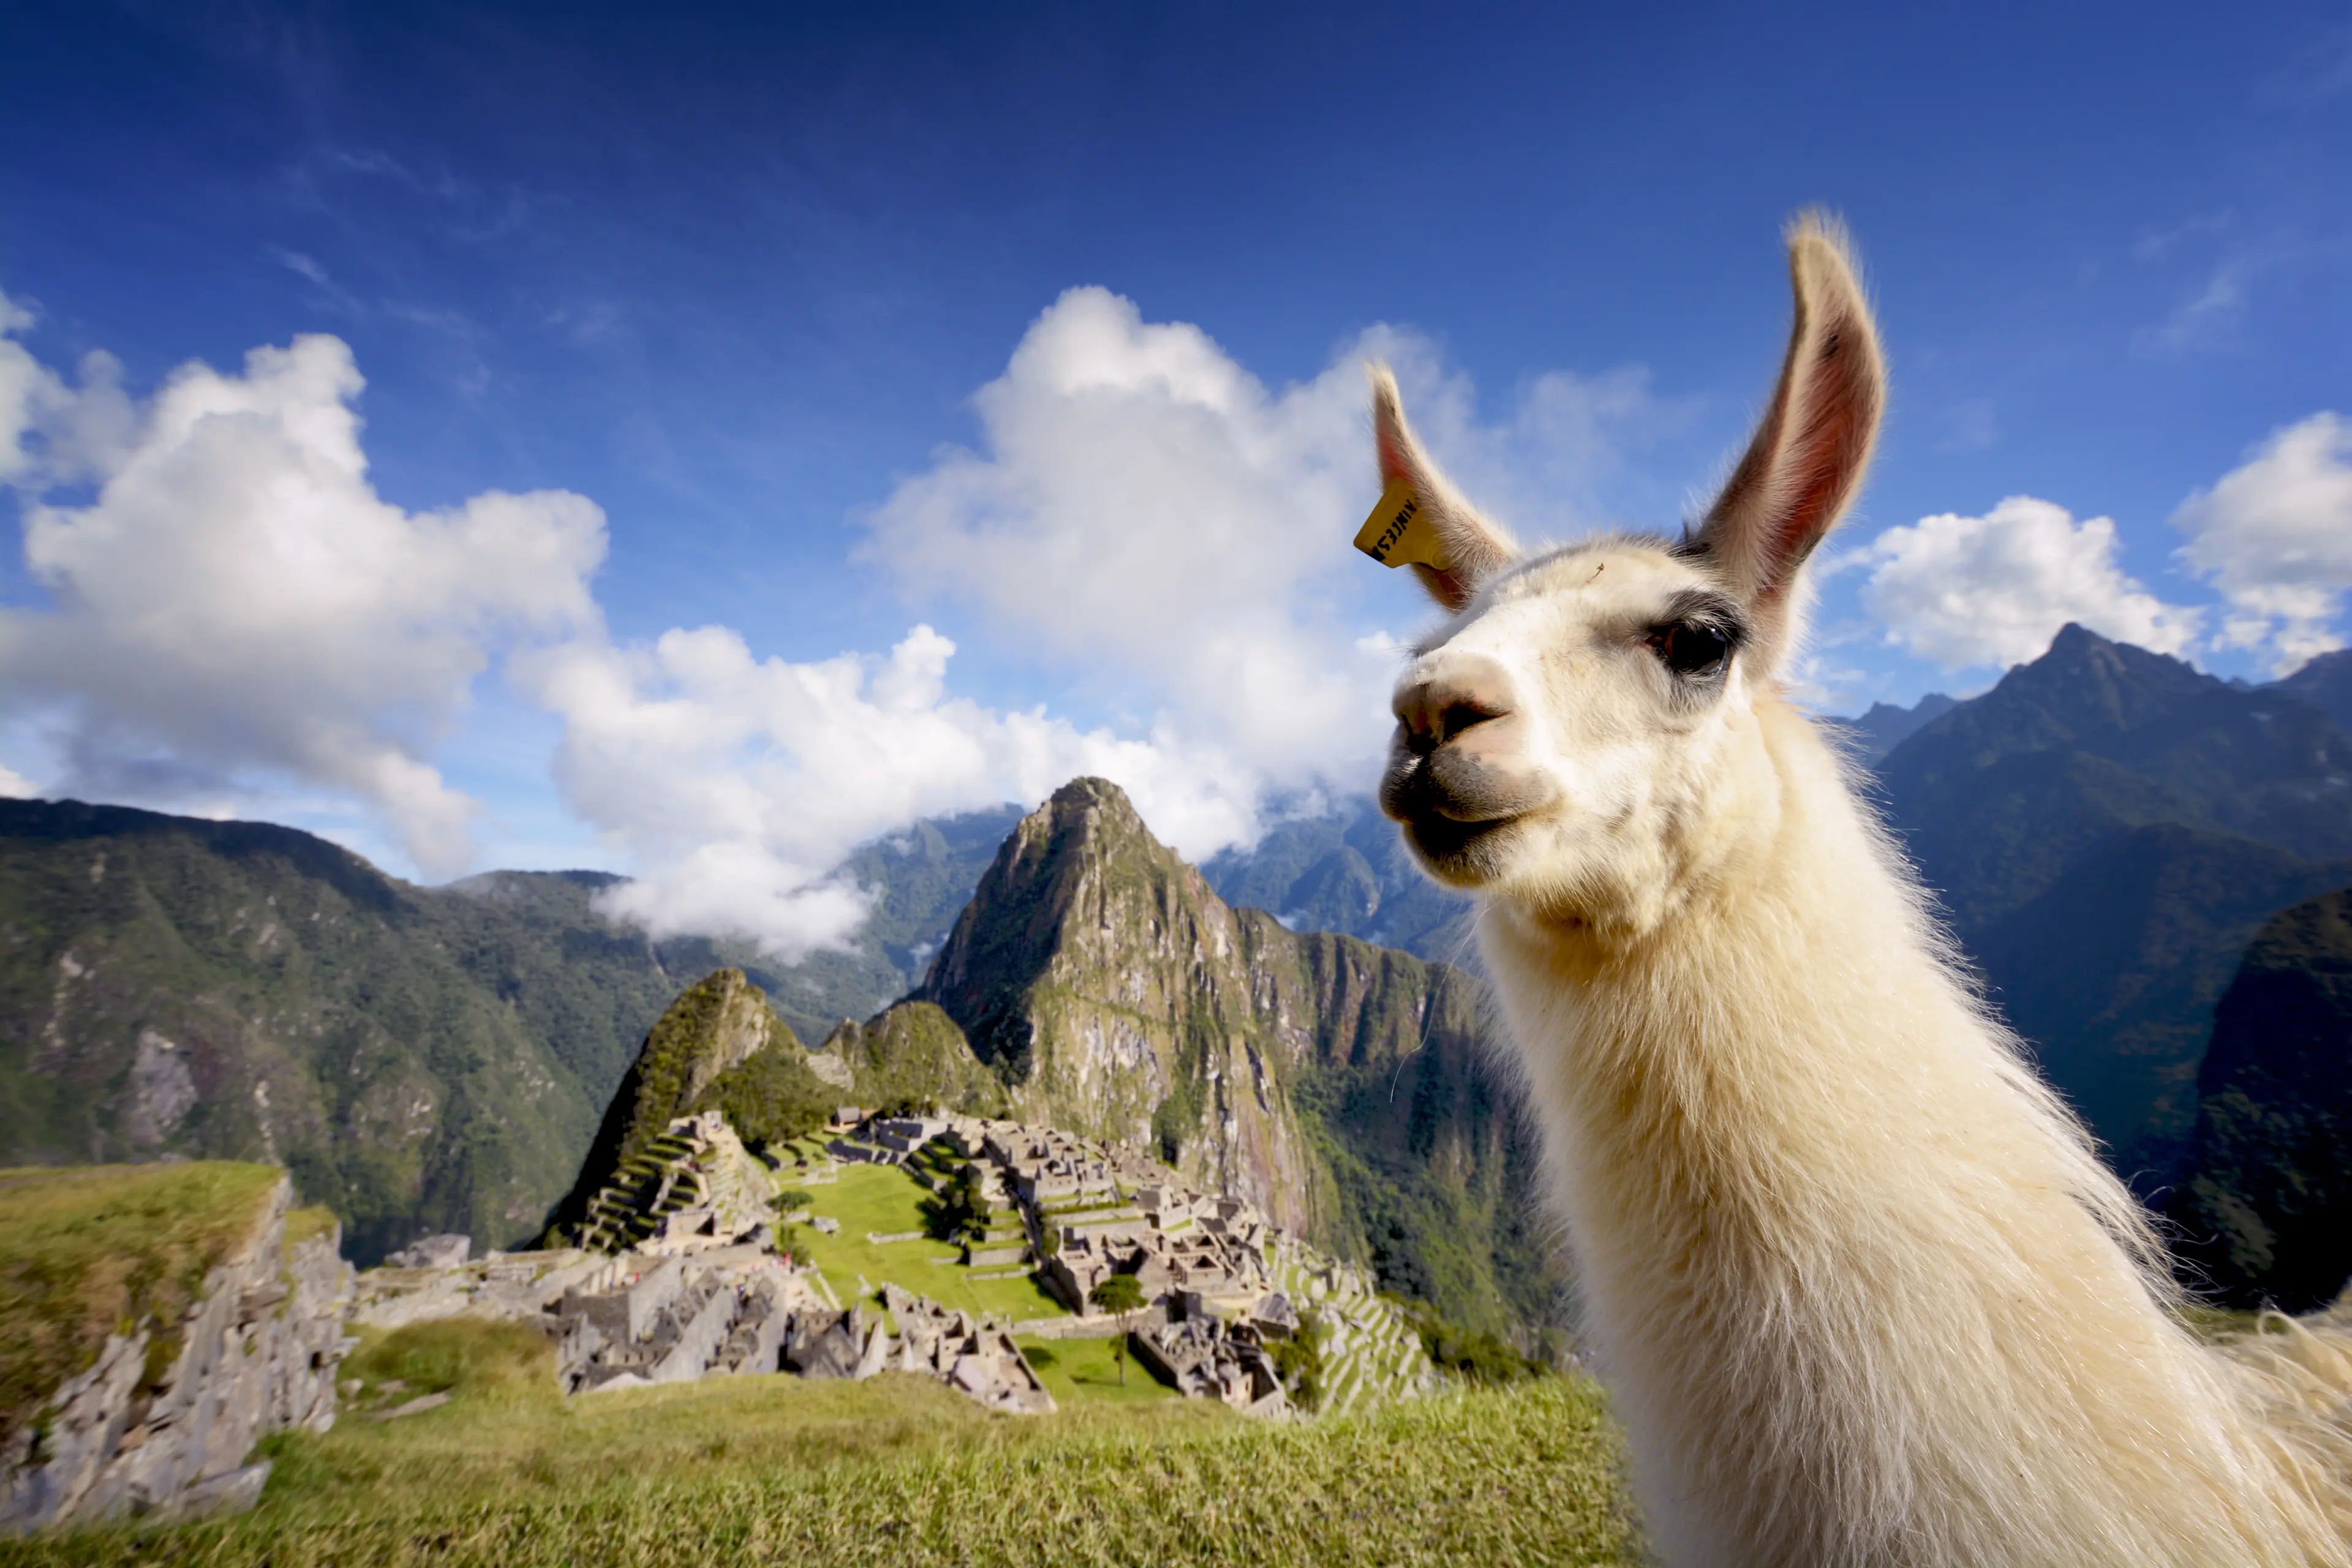 1-Day Local Experience: Machu Picchu Sightseeing & Outdoor Activities